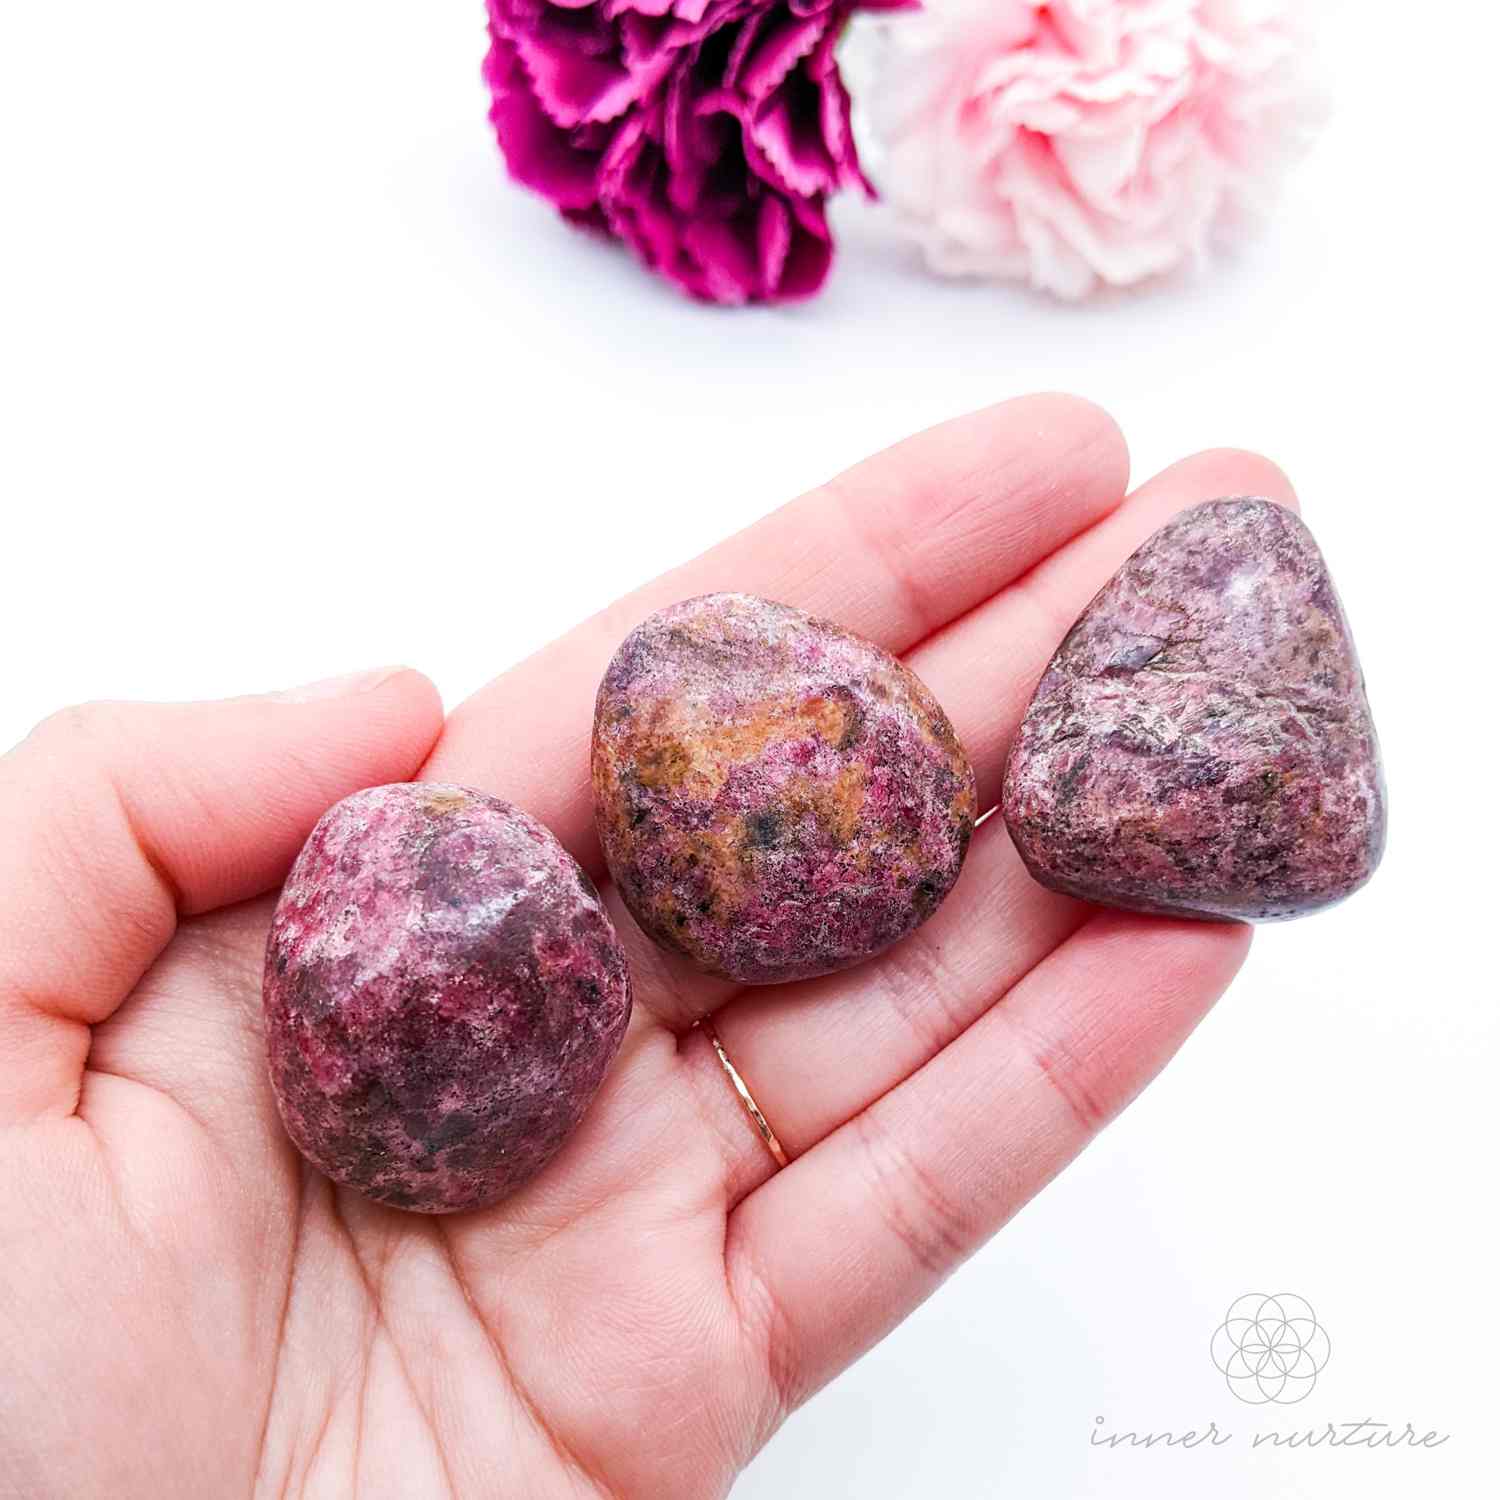 Crystals For Love & Relationships